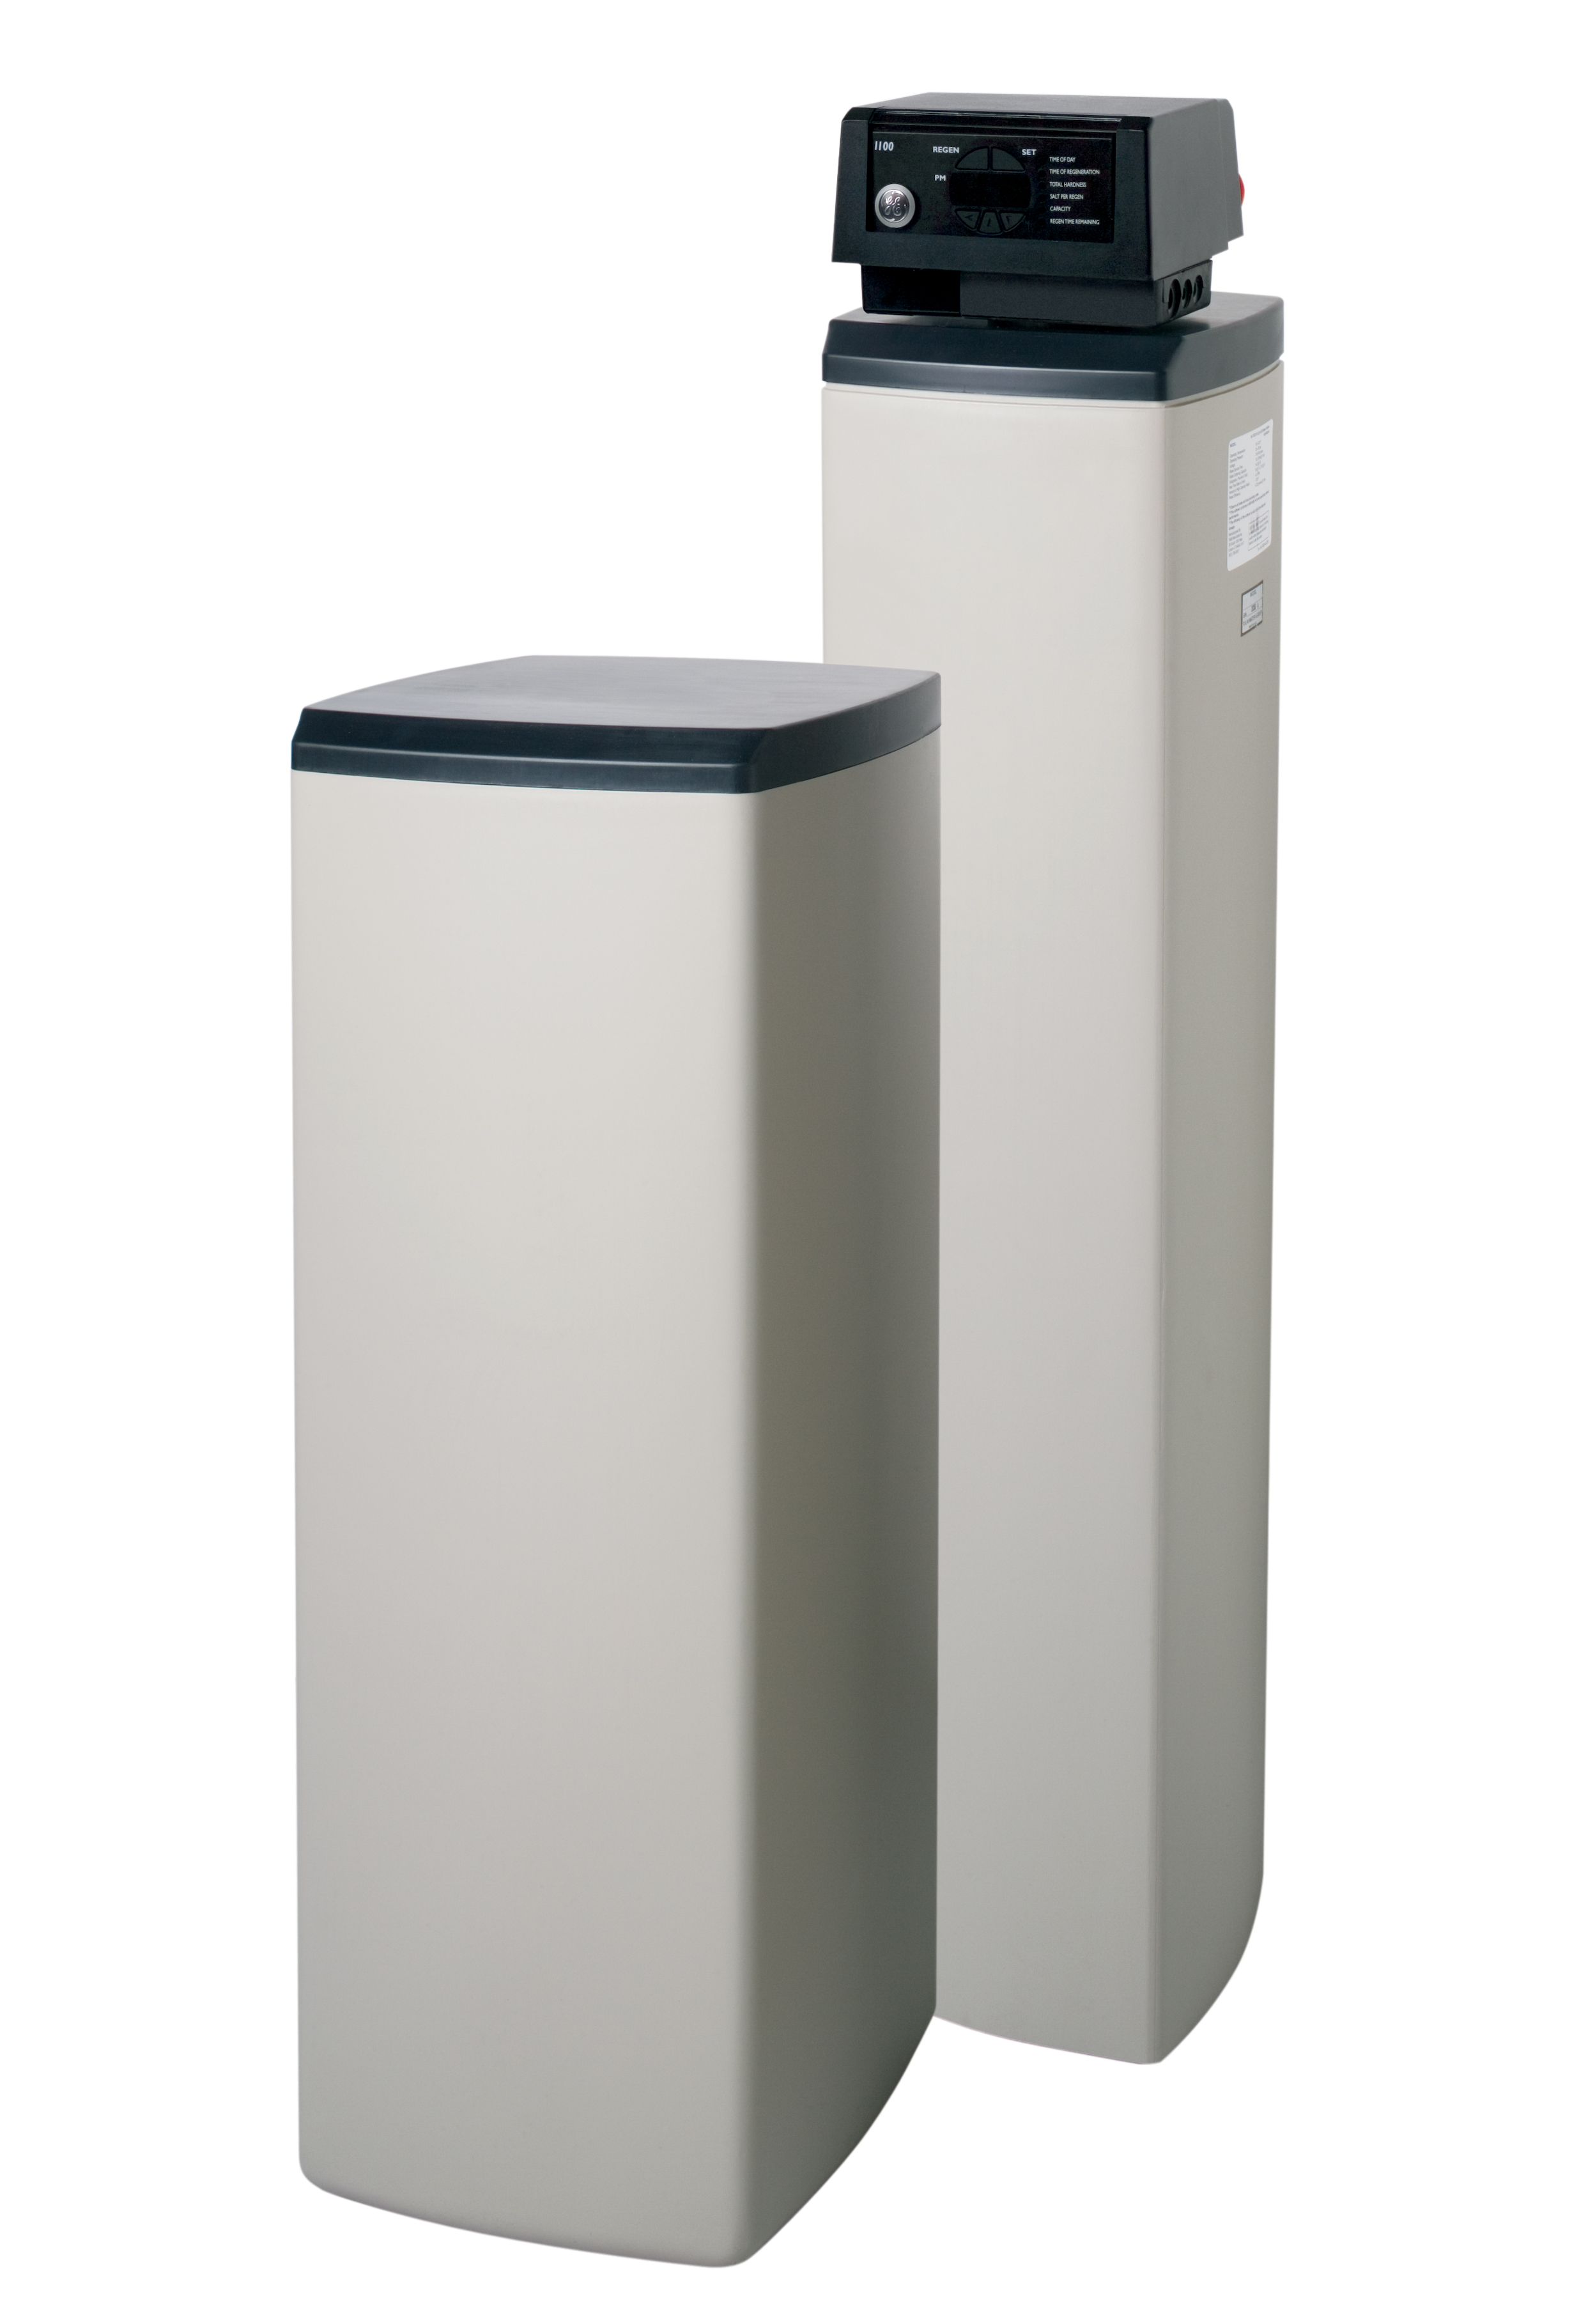 GE® Water Softener System